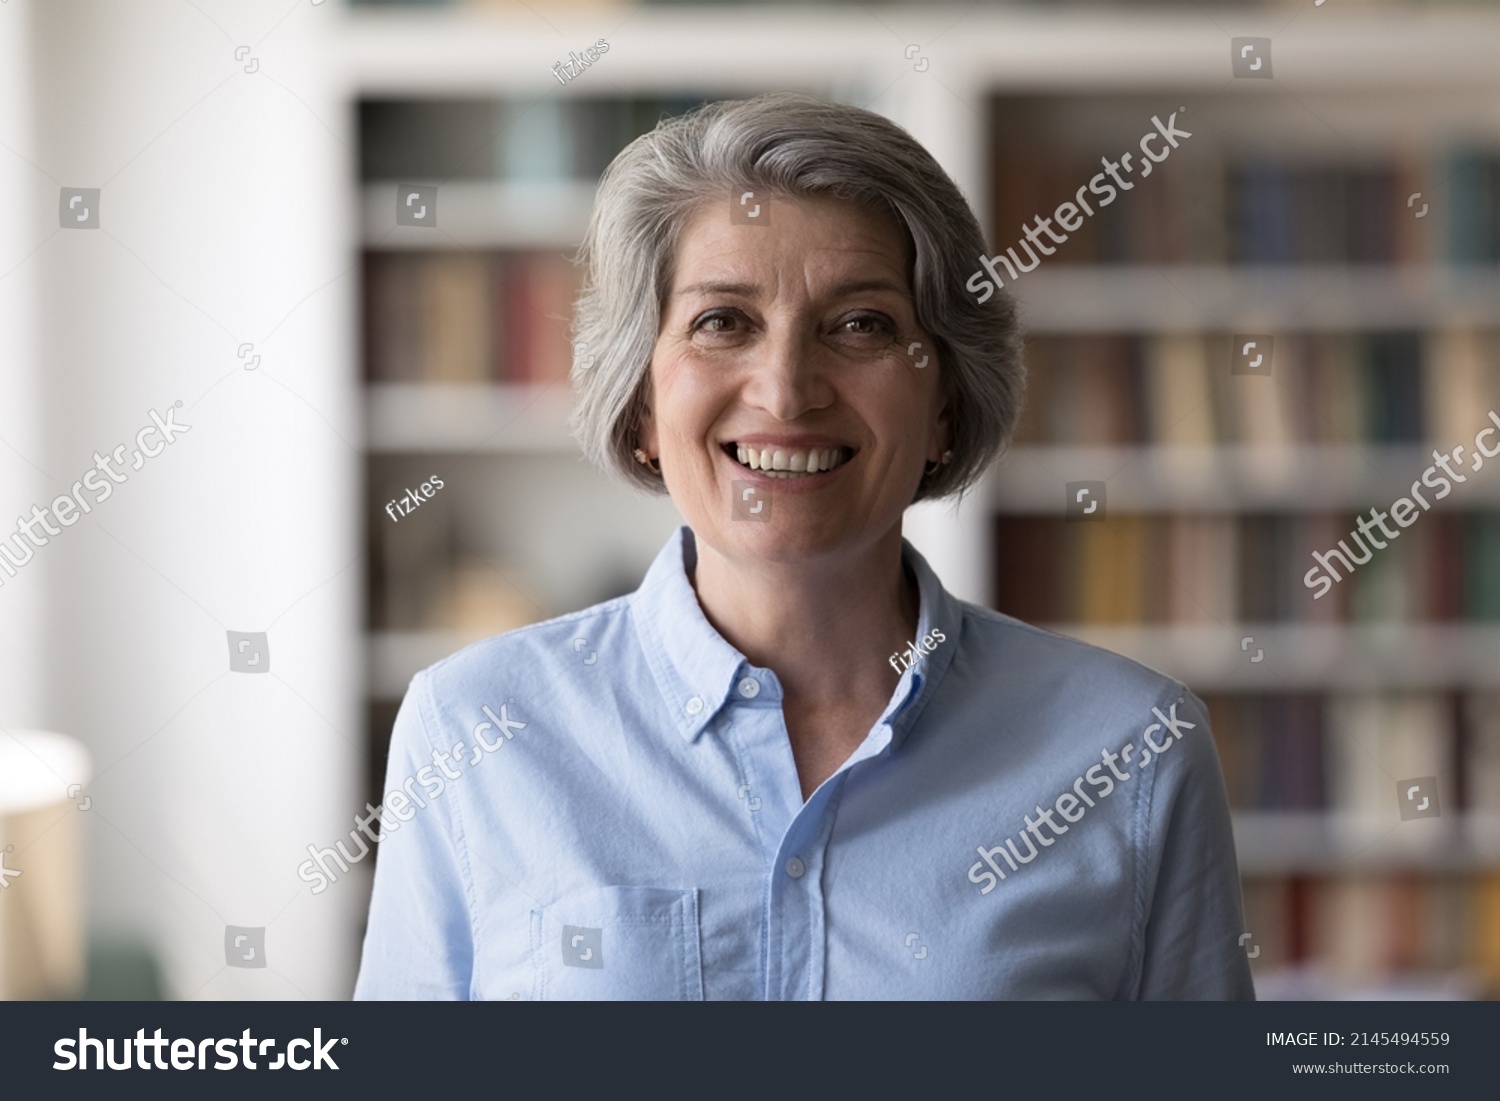 Head shot portrait of happy middle aged old hoary attractive successful businesswoman entrepreneur employee posing in modern home office, professional corporate career, female leadership concept. #2145494559